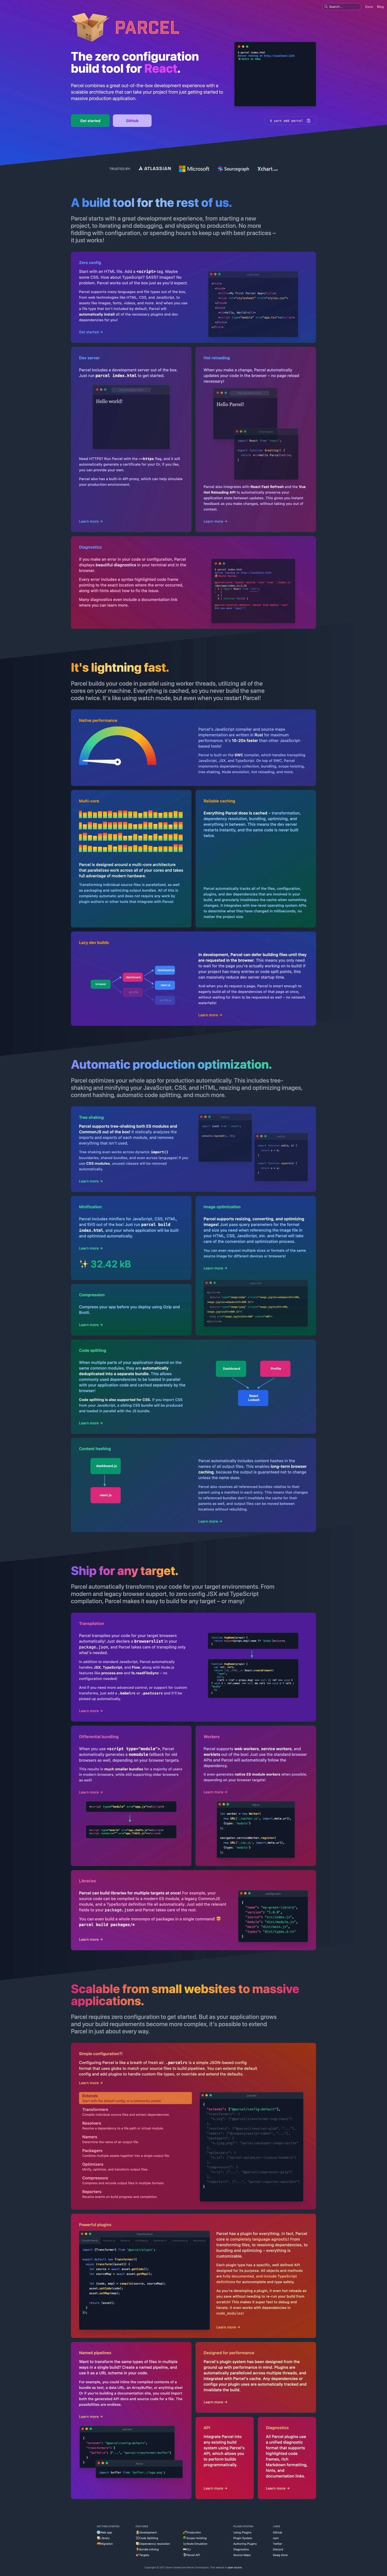 Parcel Landing Page Example: Parcel combines a great out-of-the-box development experience with a scalable architecture that can take your project from just getting started to massive production application.